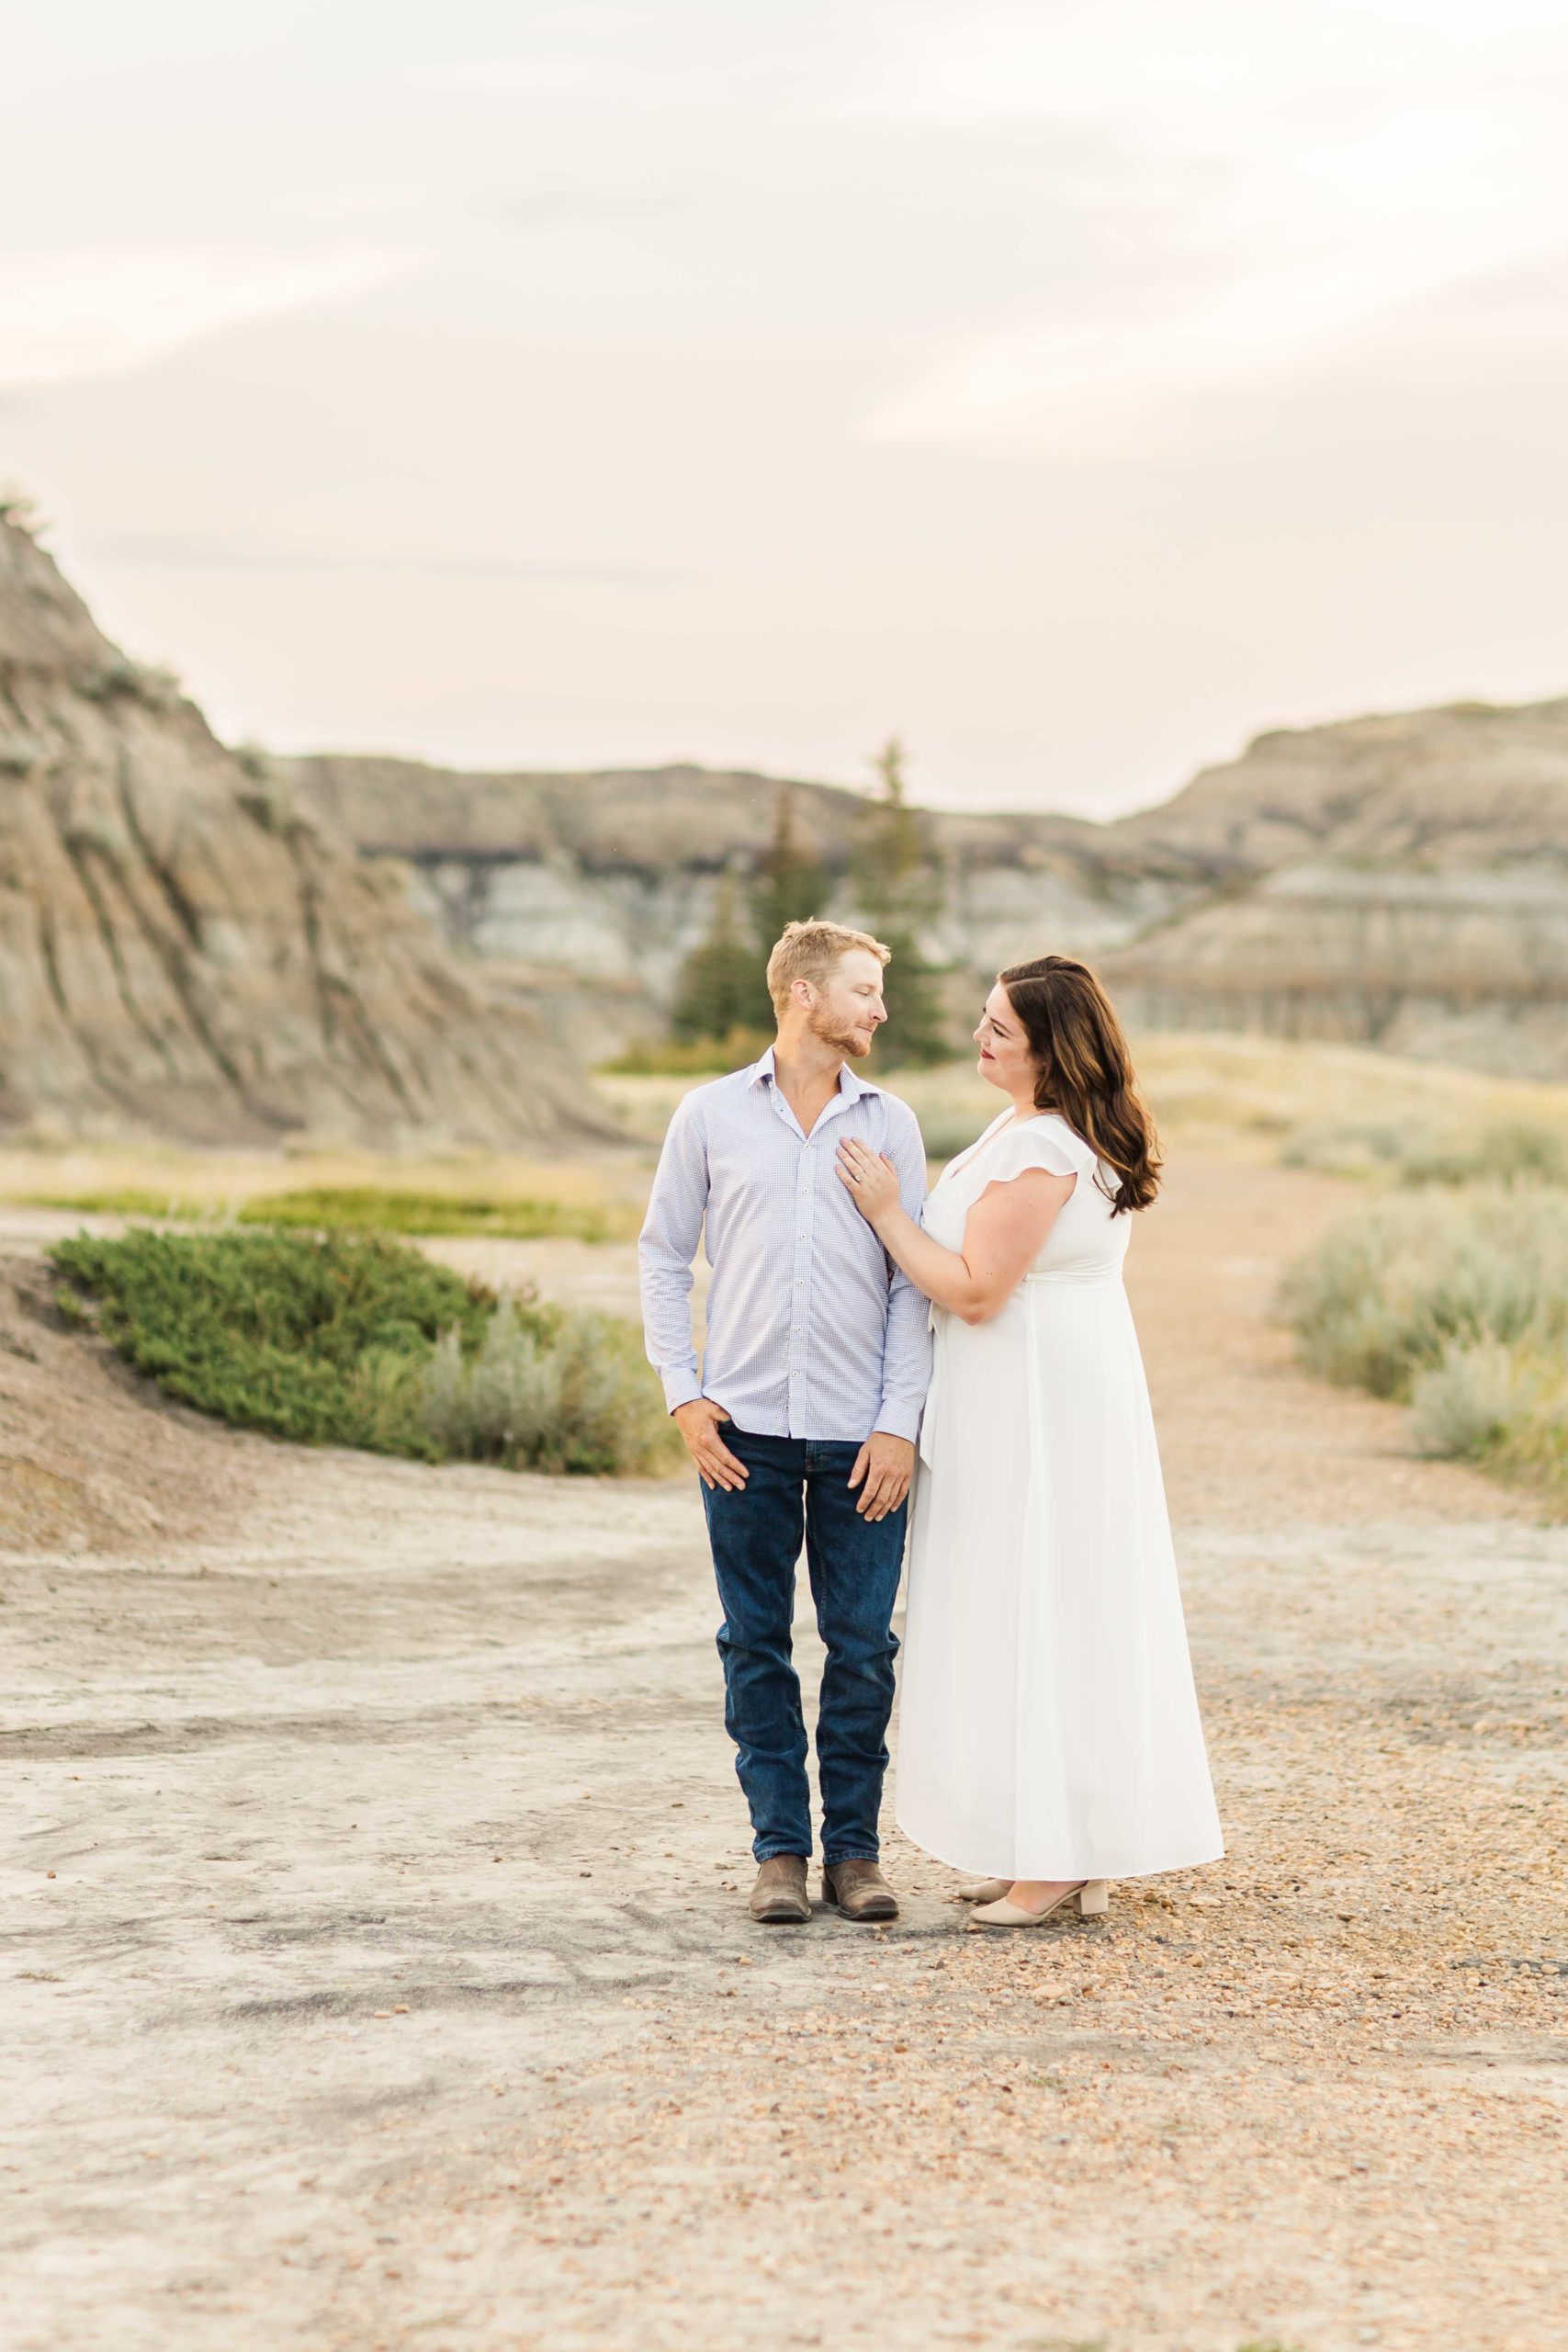 Engagement Session in HorseShoeCanyon, Alberta. Photographed by Brittany Anne Photography